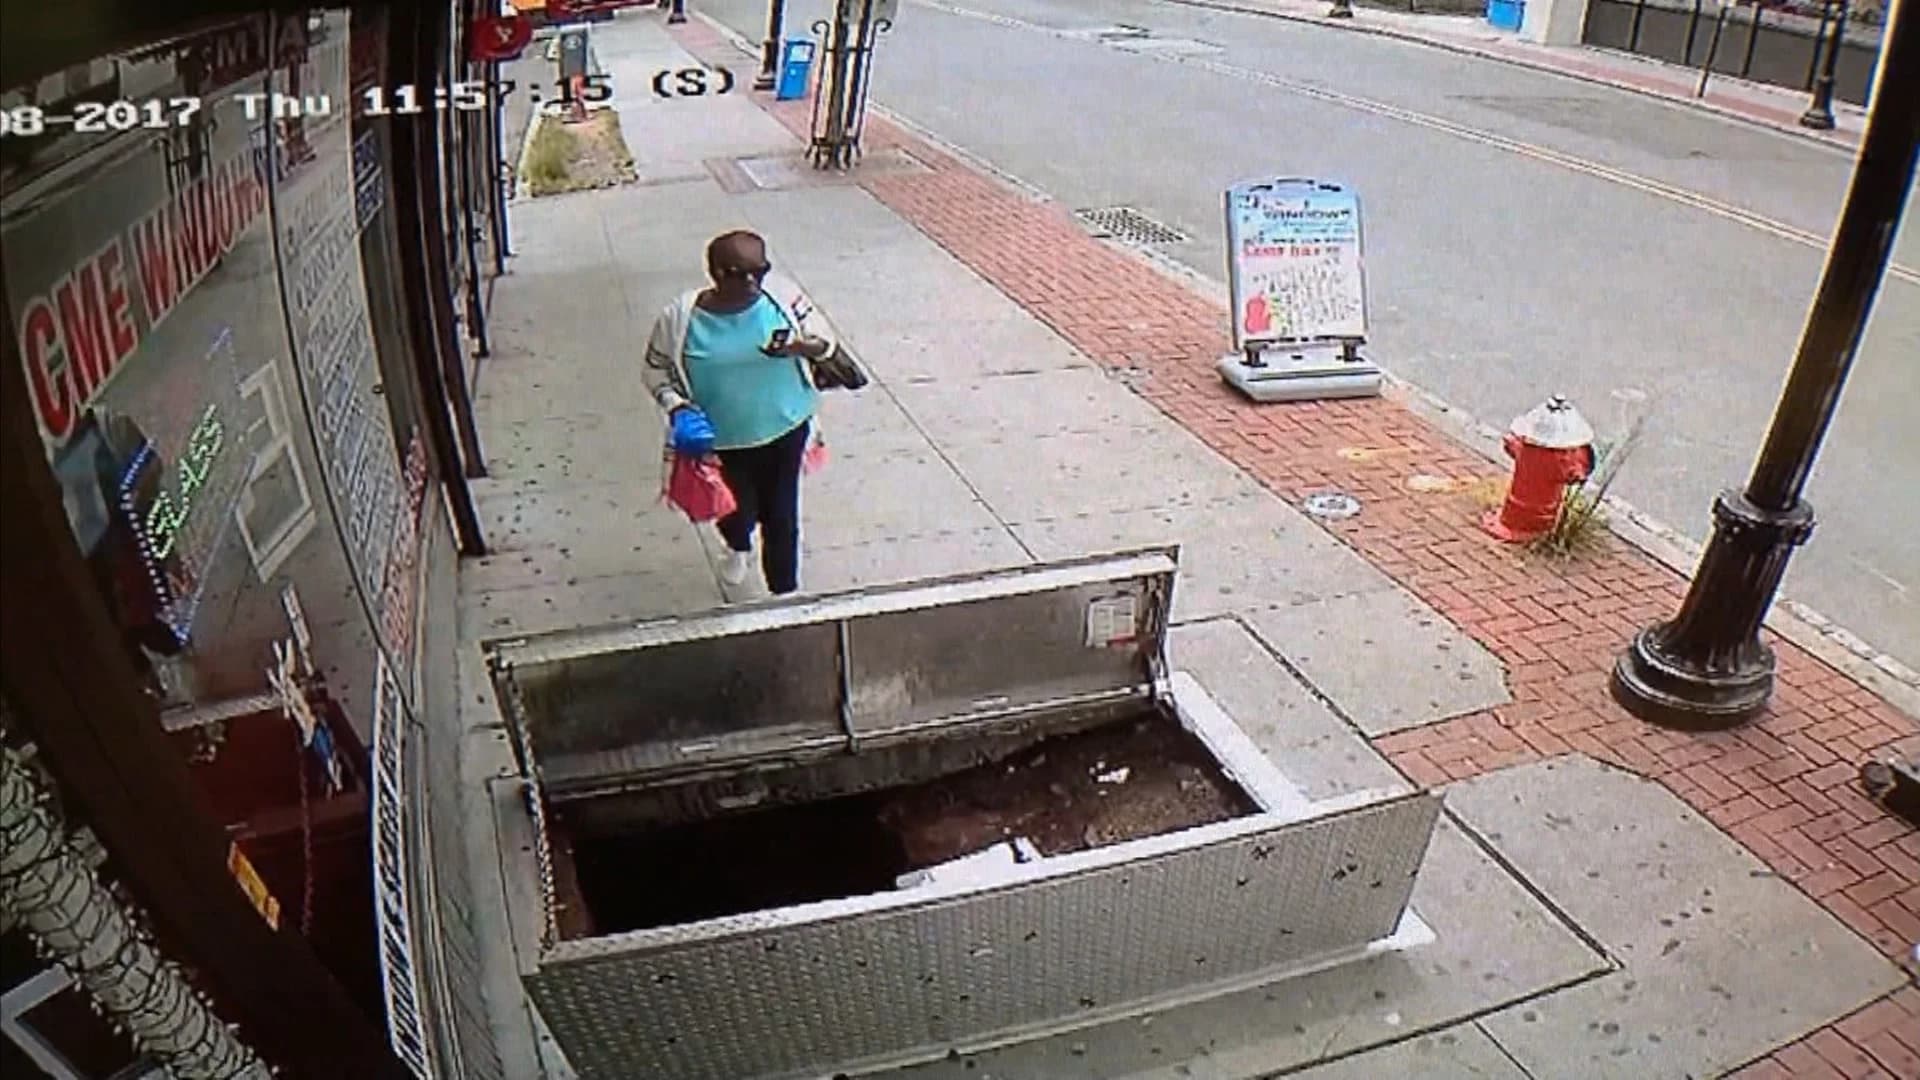 VIDEO: Woman falls though open sidewalk access door while on phone